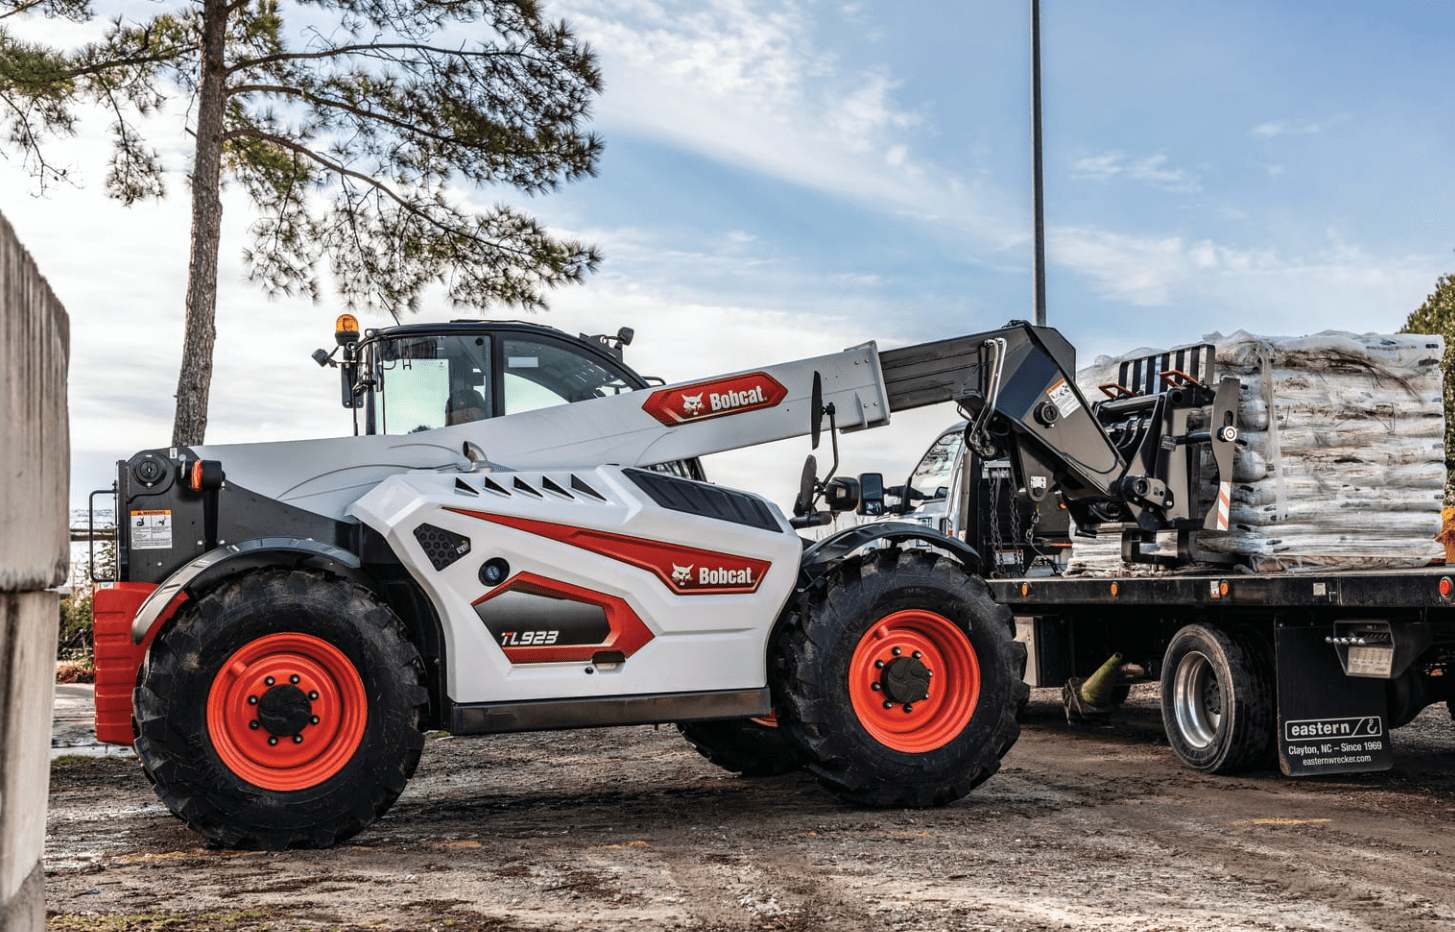 Browse Specs and more for the TL923 Telehandler - Bobcat of the Rockies